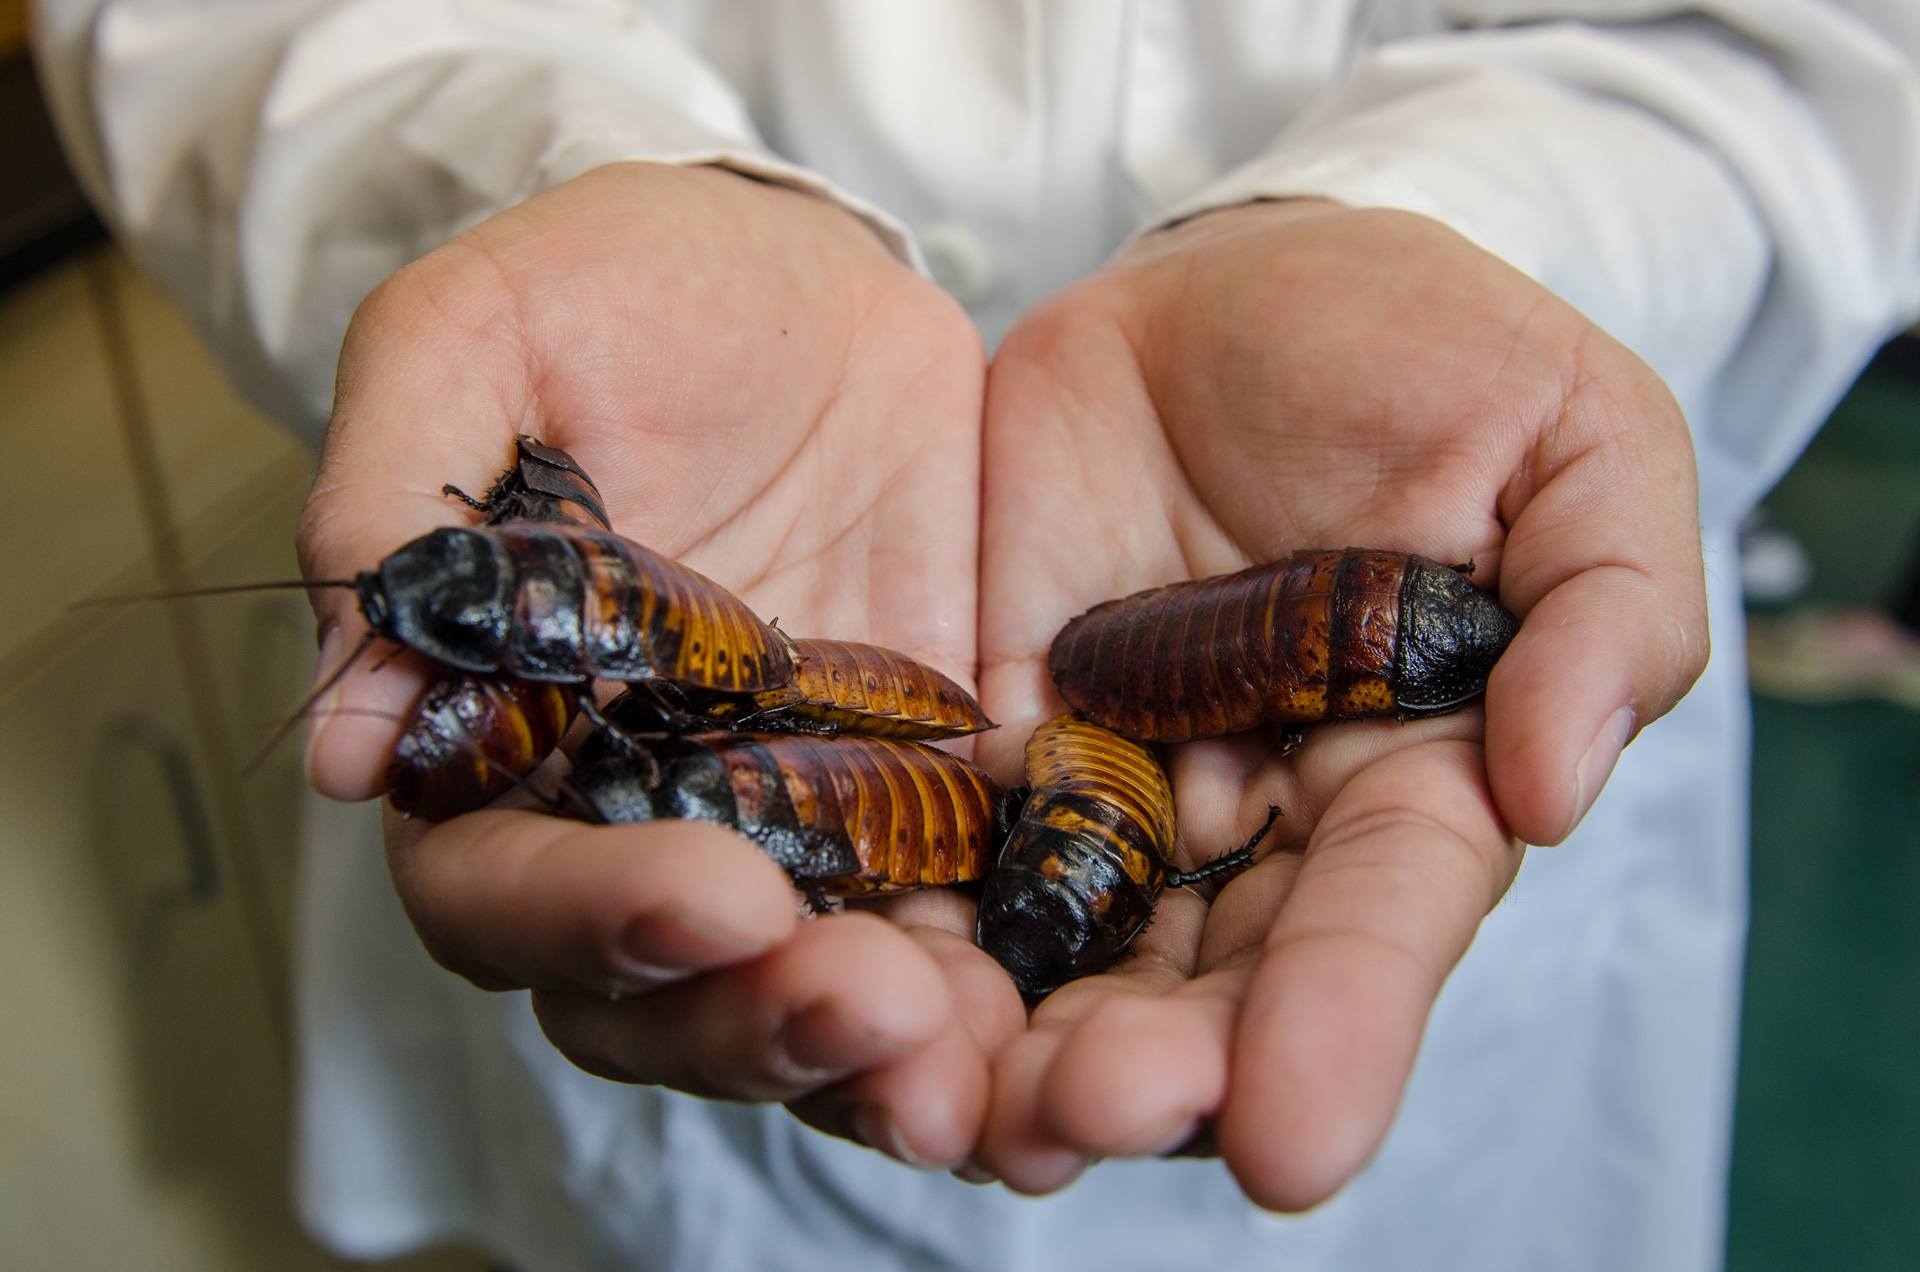 Heidy Contreras' Hands with Cockroaches